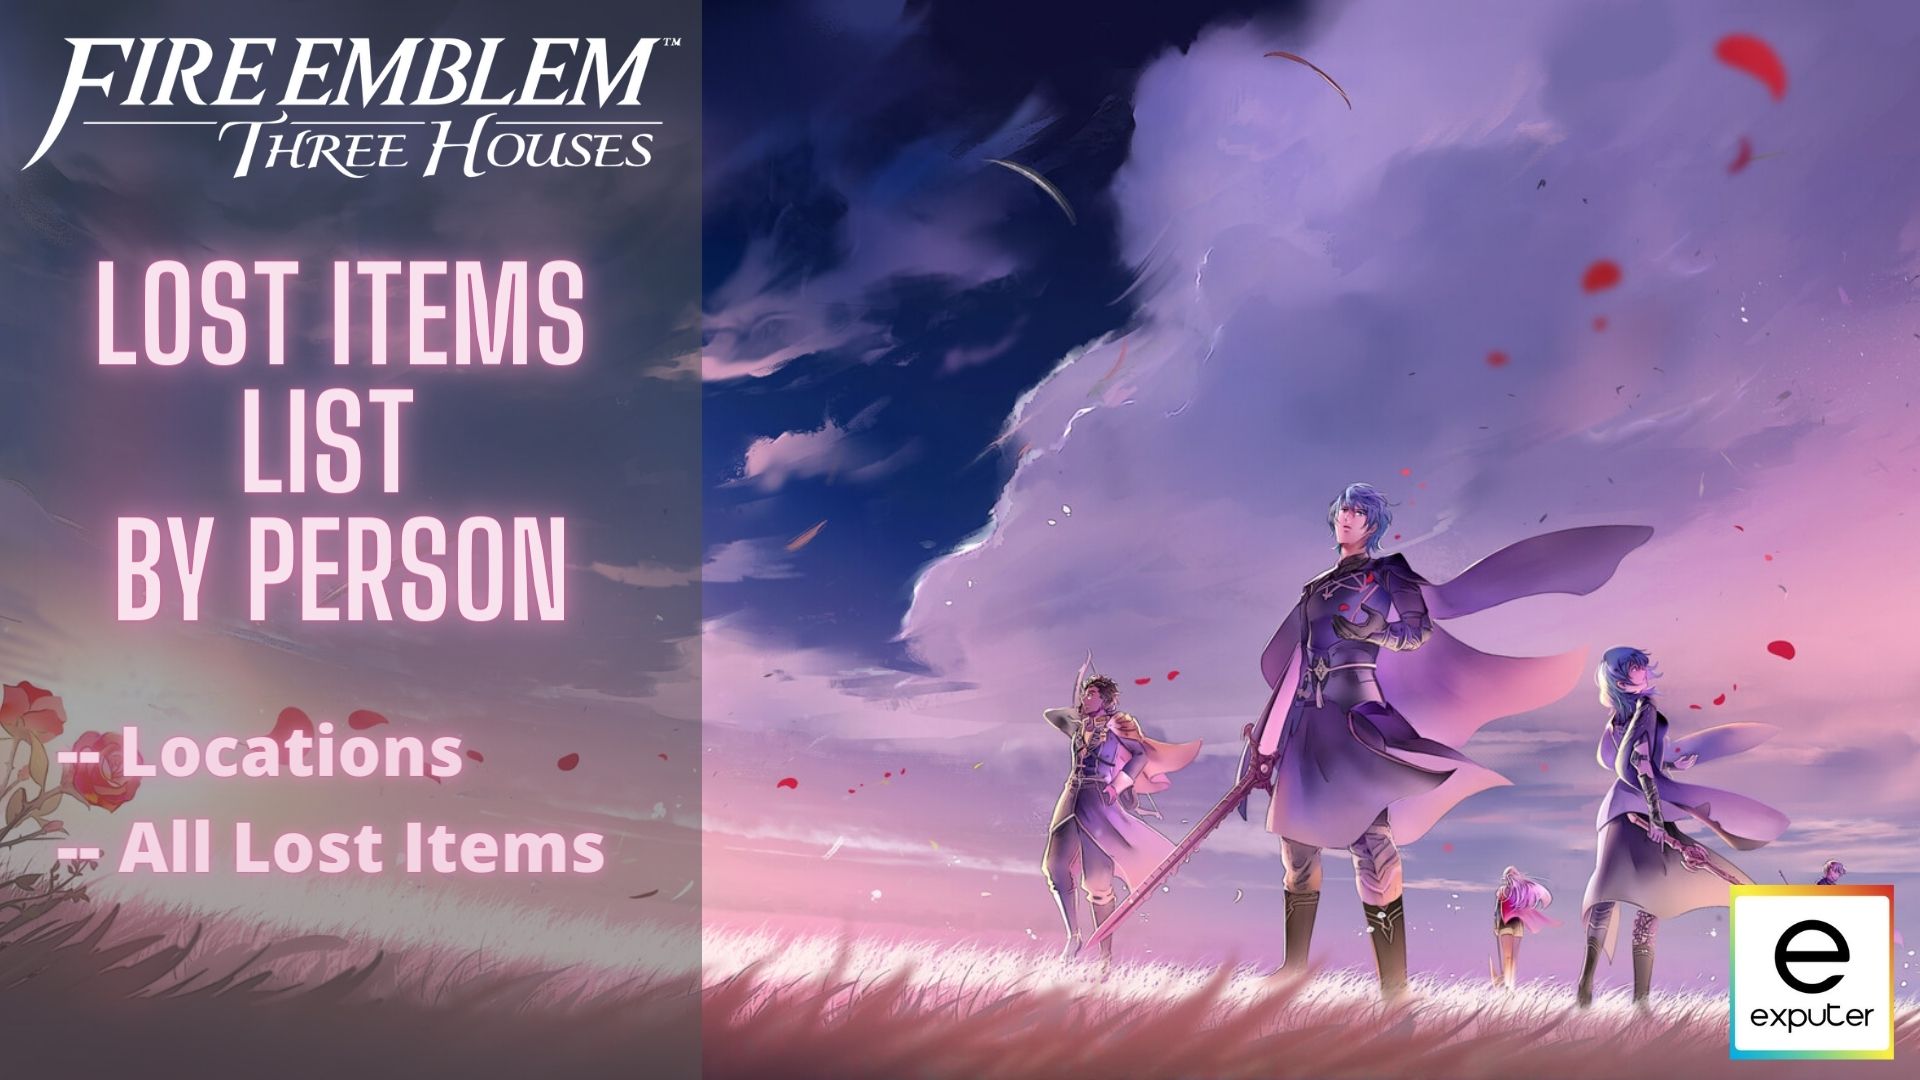 LosT Items In Fire Emblem three houses